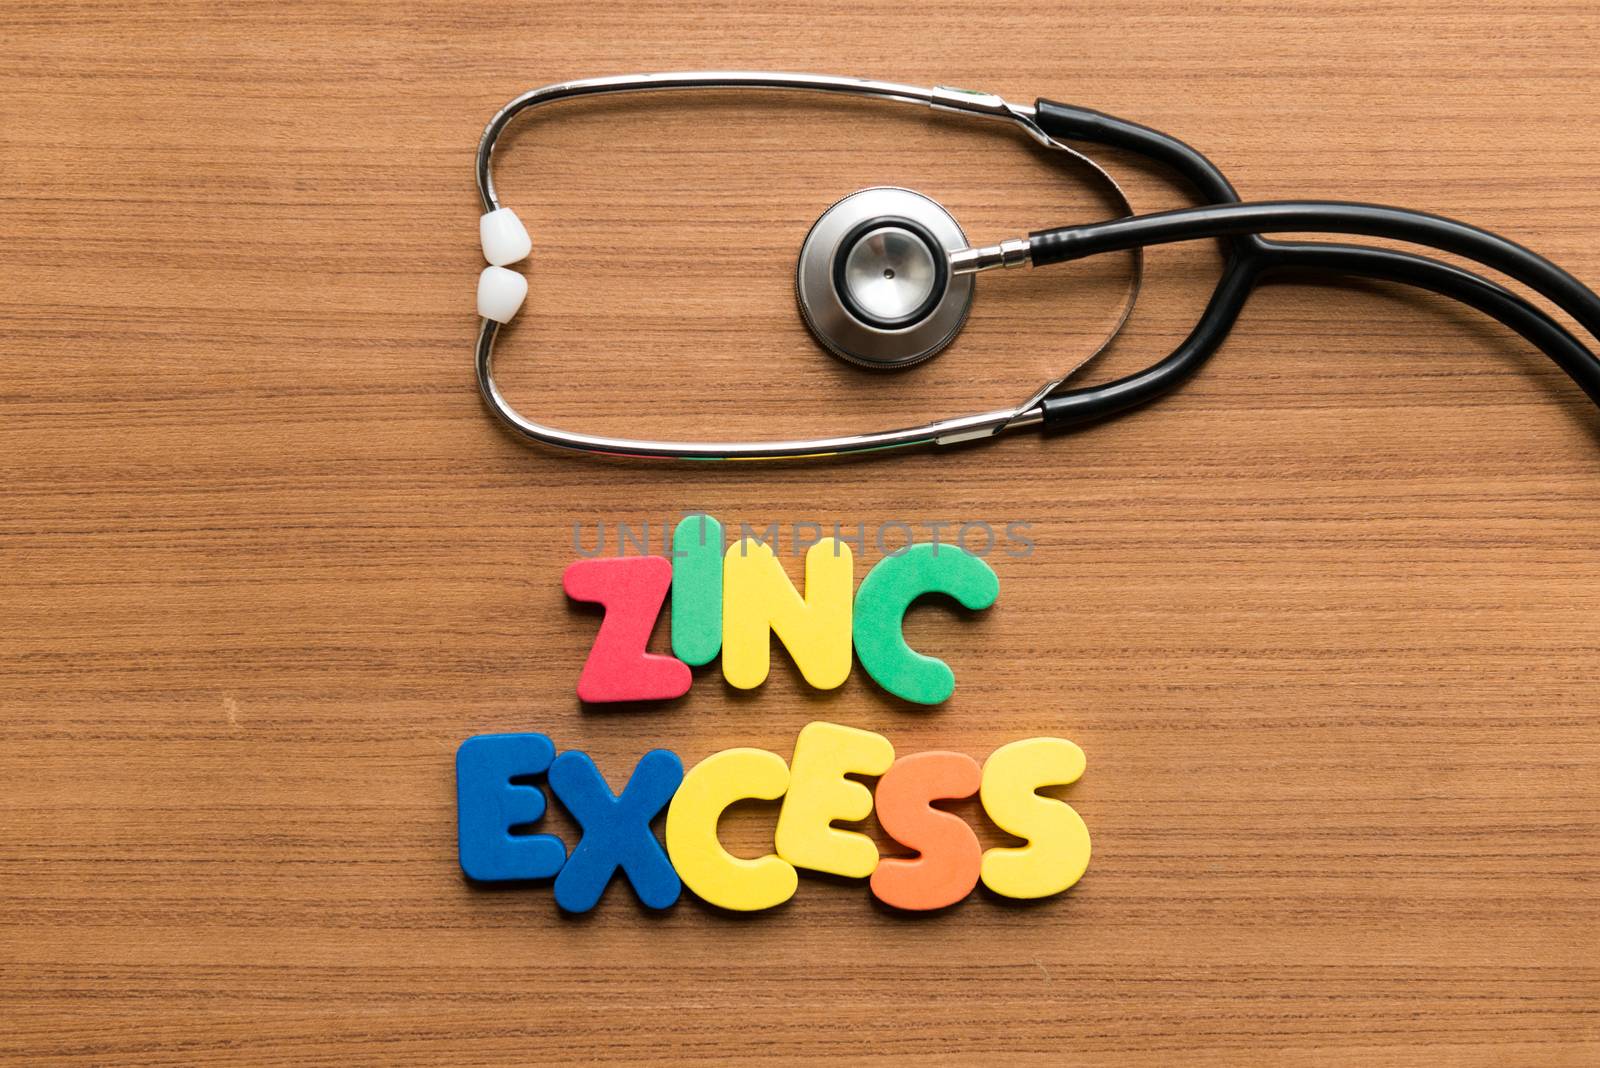 zinc excess colorful word with stethoscope by sohel.parvez@hotmail.com